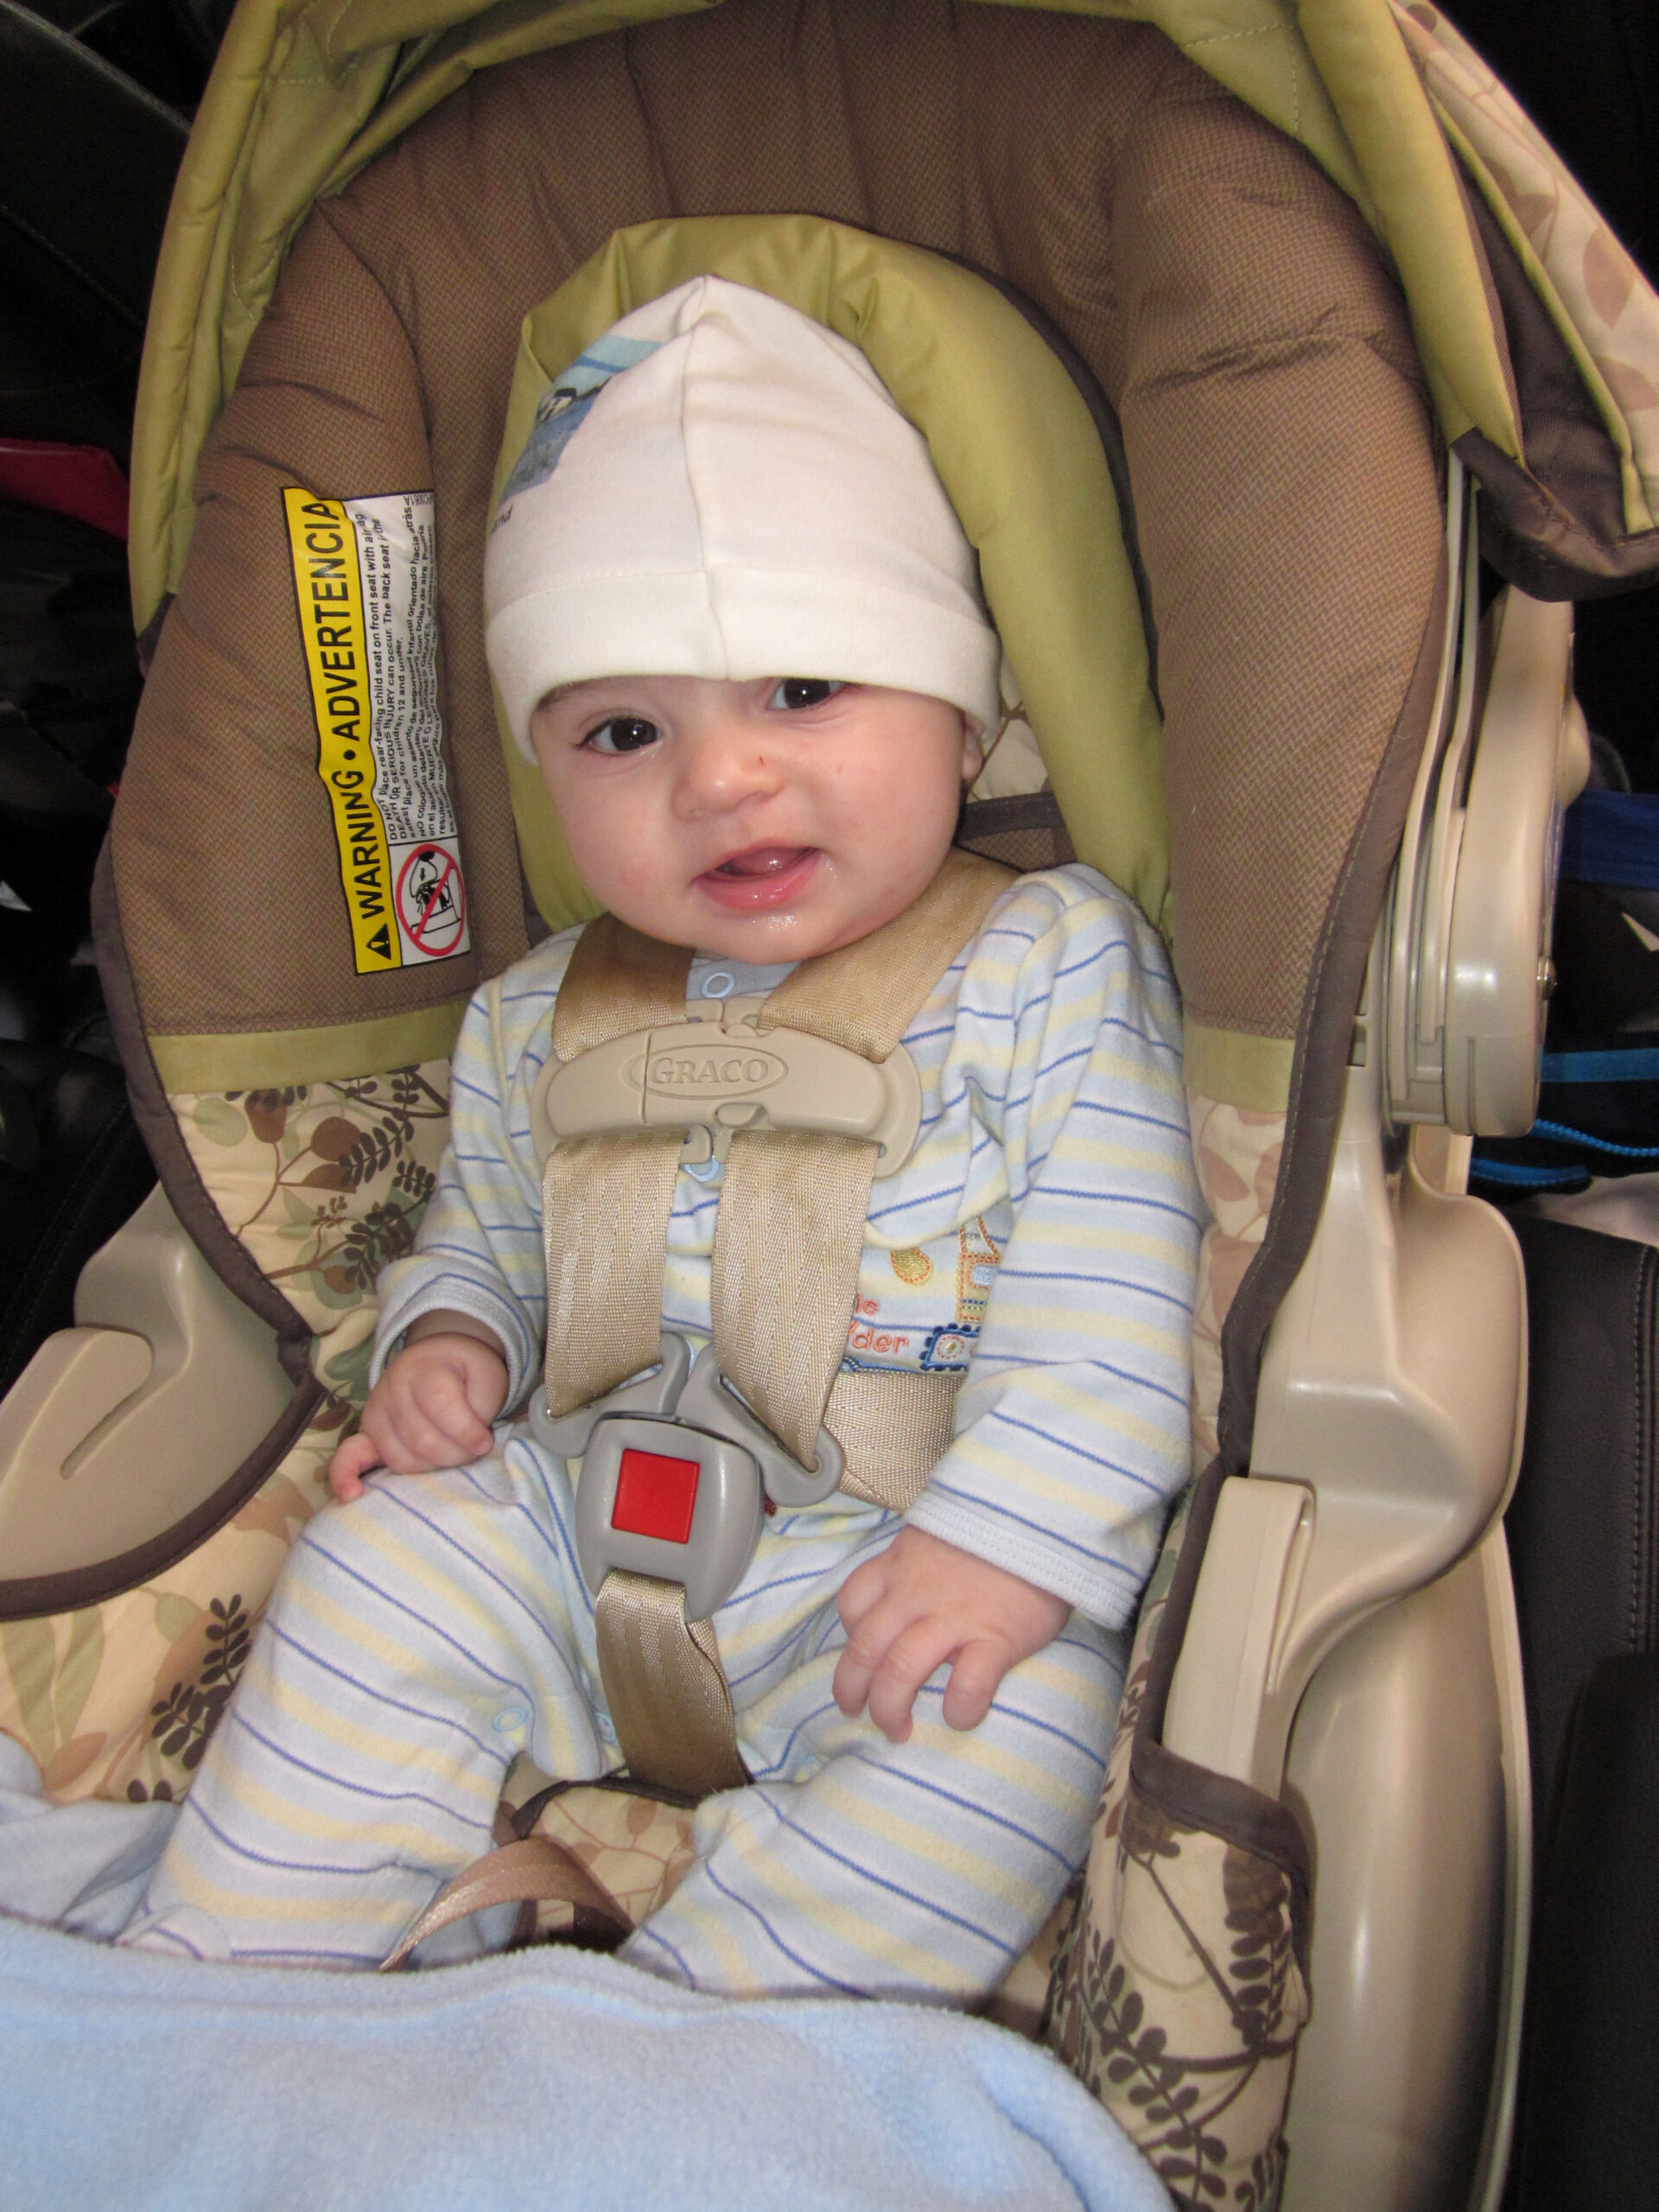 Baby in hat buckled into car seat.